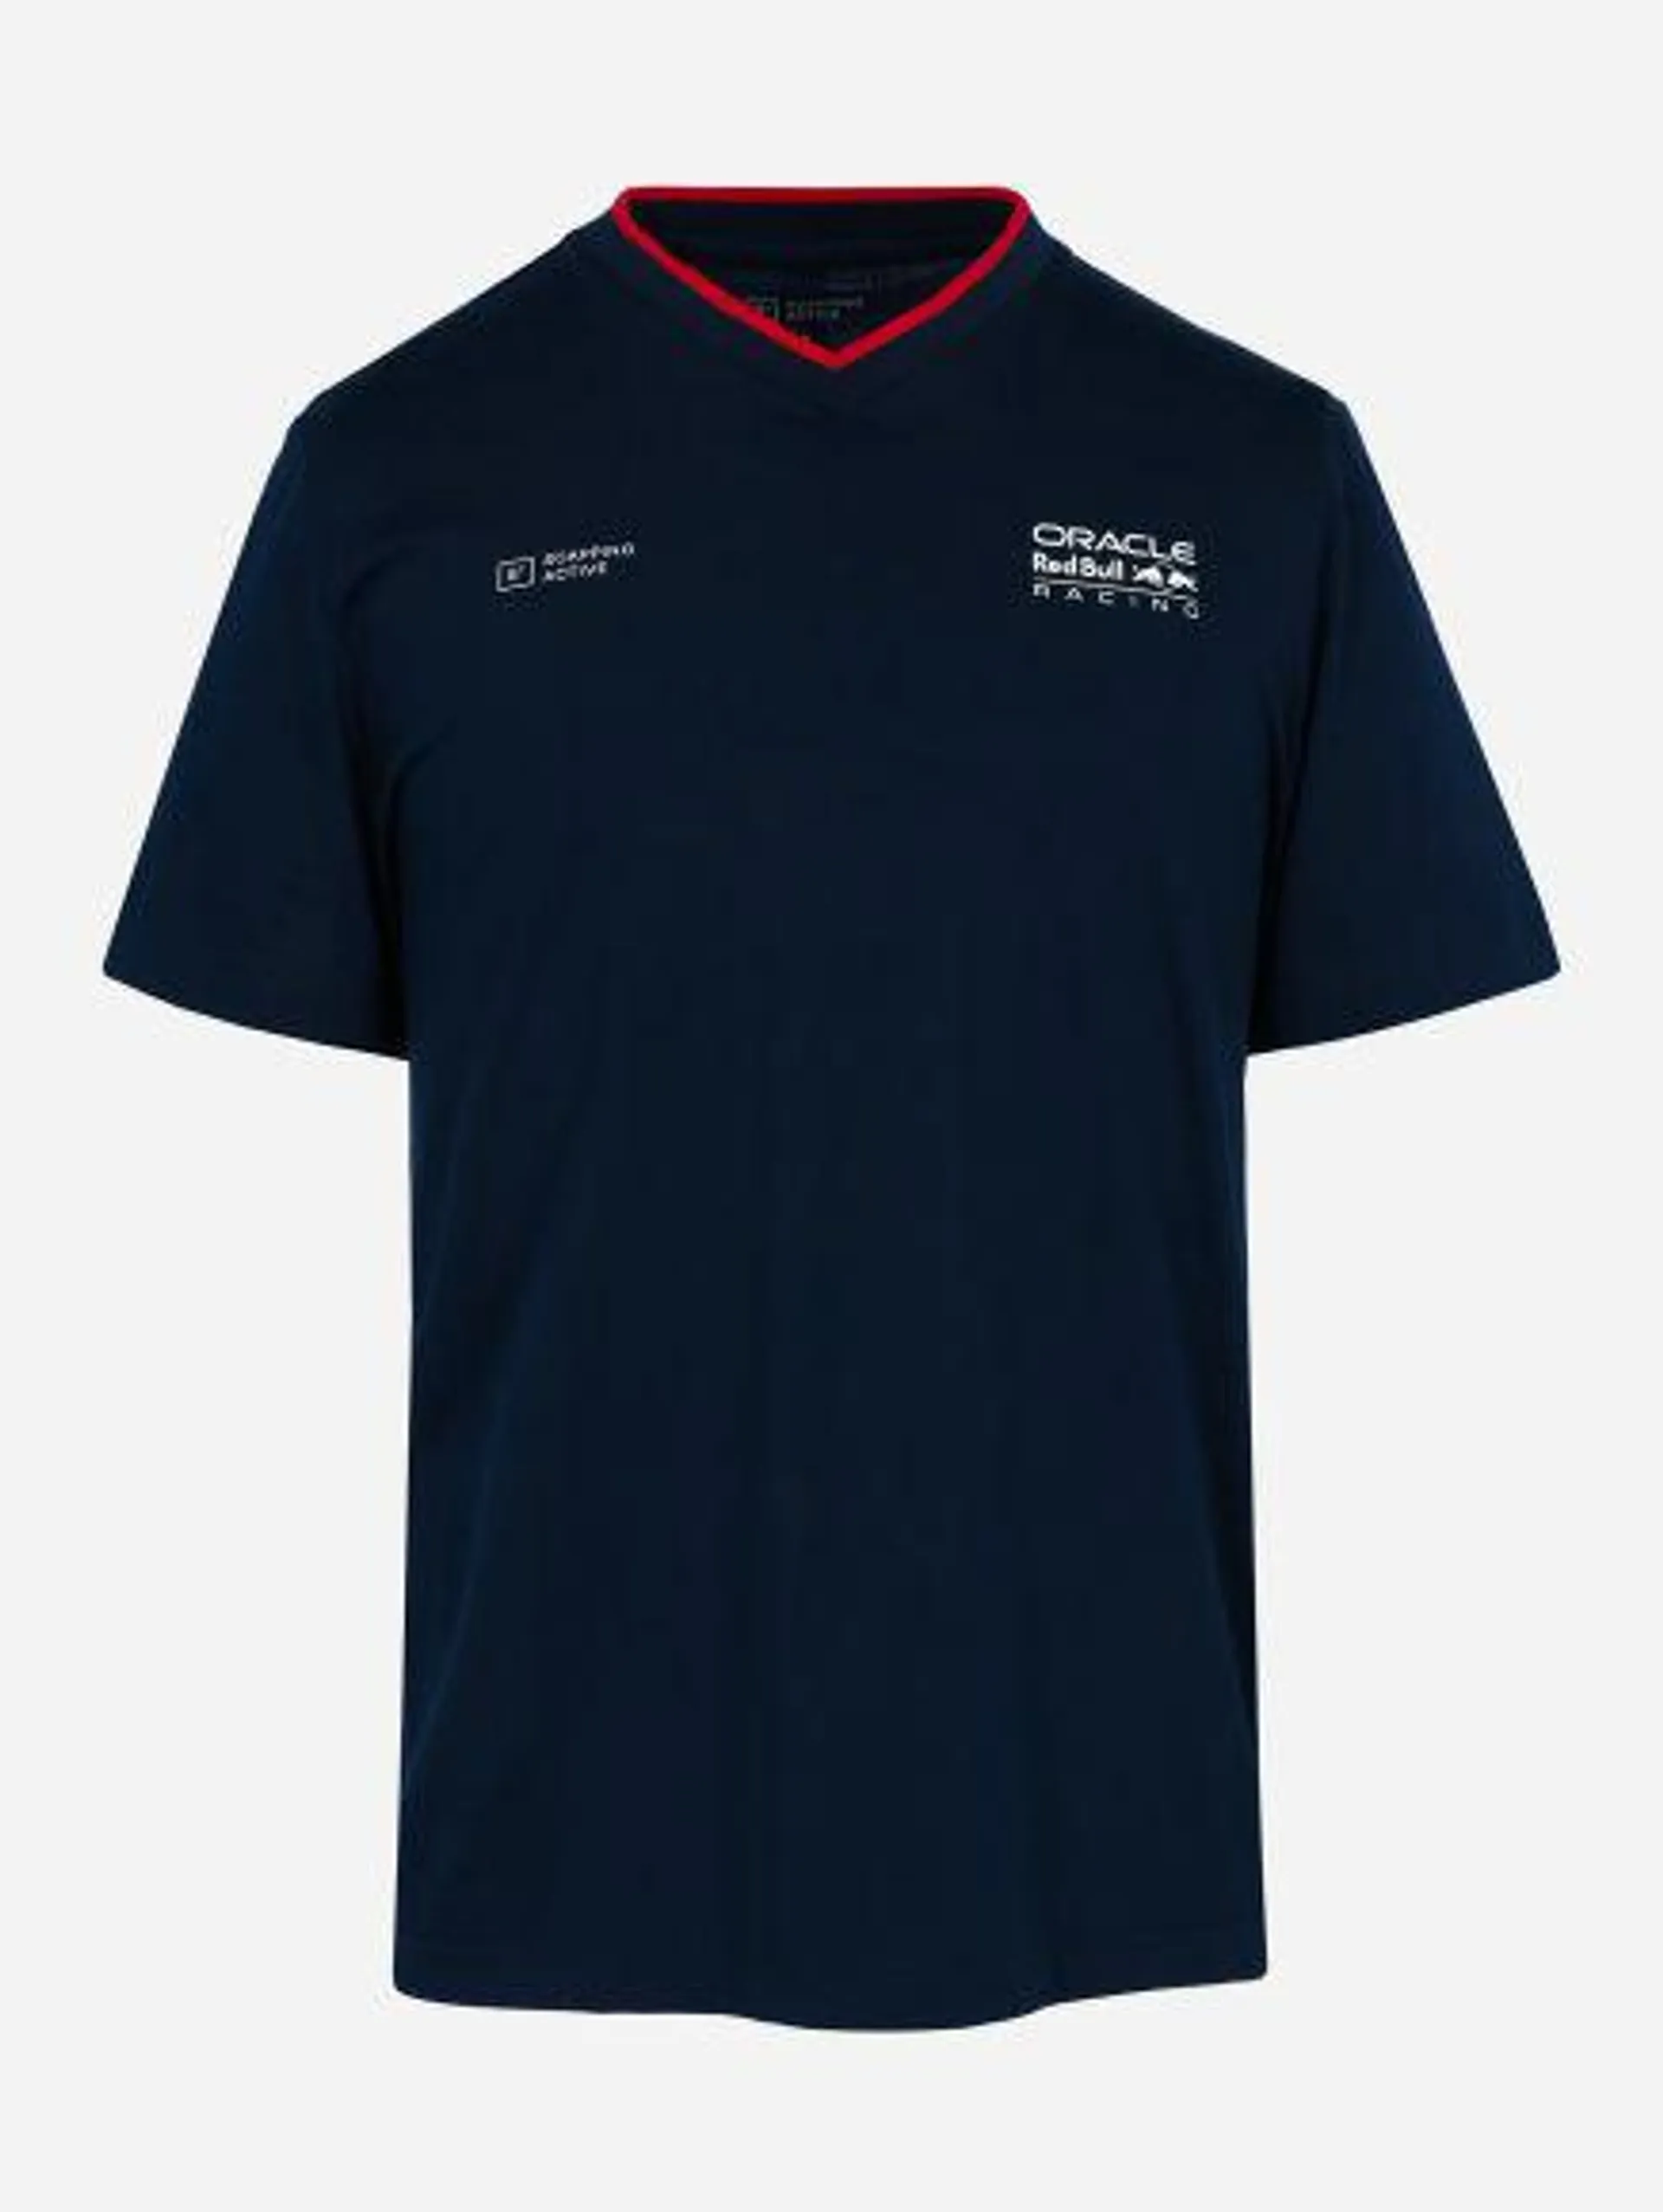 T-Shirt Oracle Red Bull Racing by Scappino